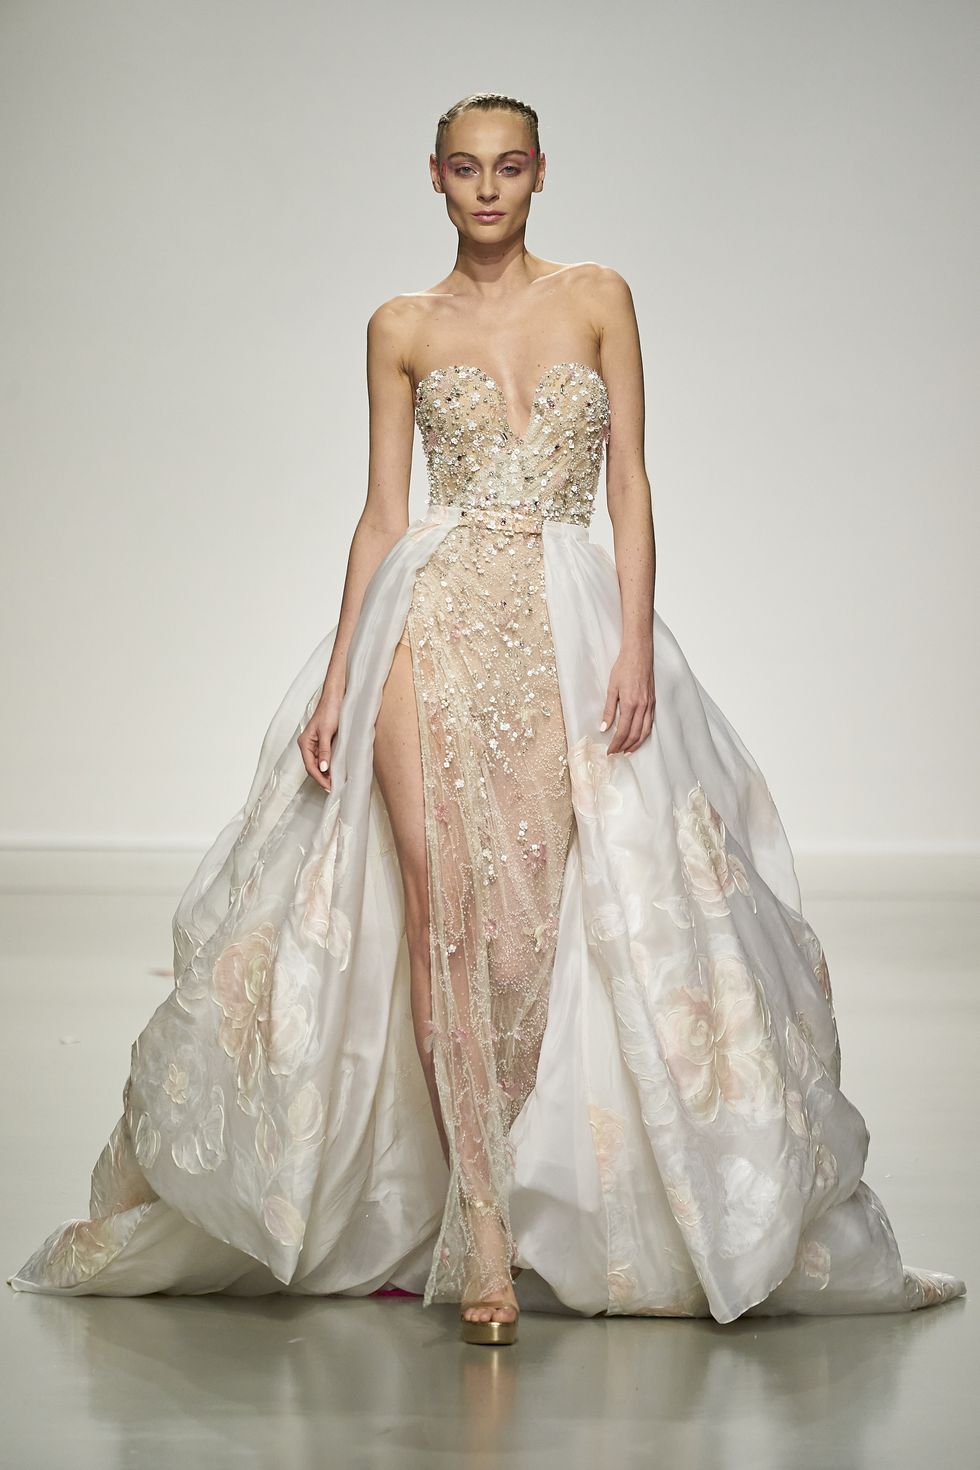 Wedding dress inspo straight from the catwalks at